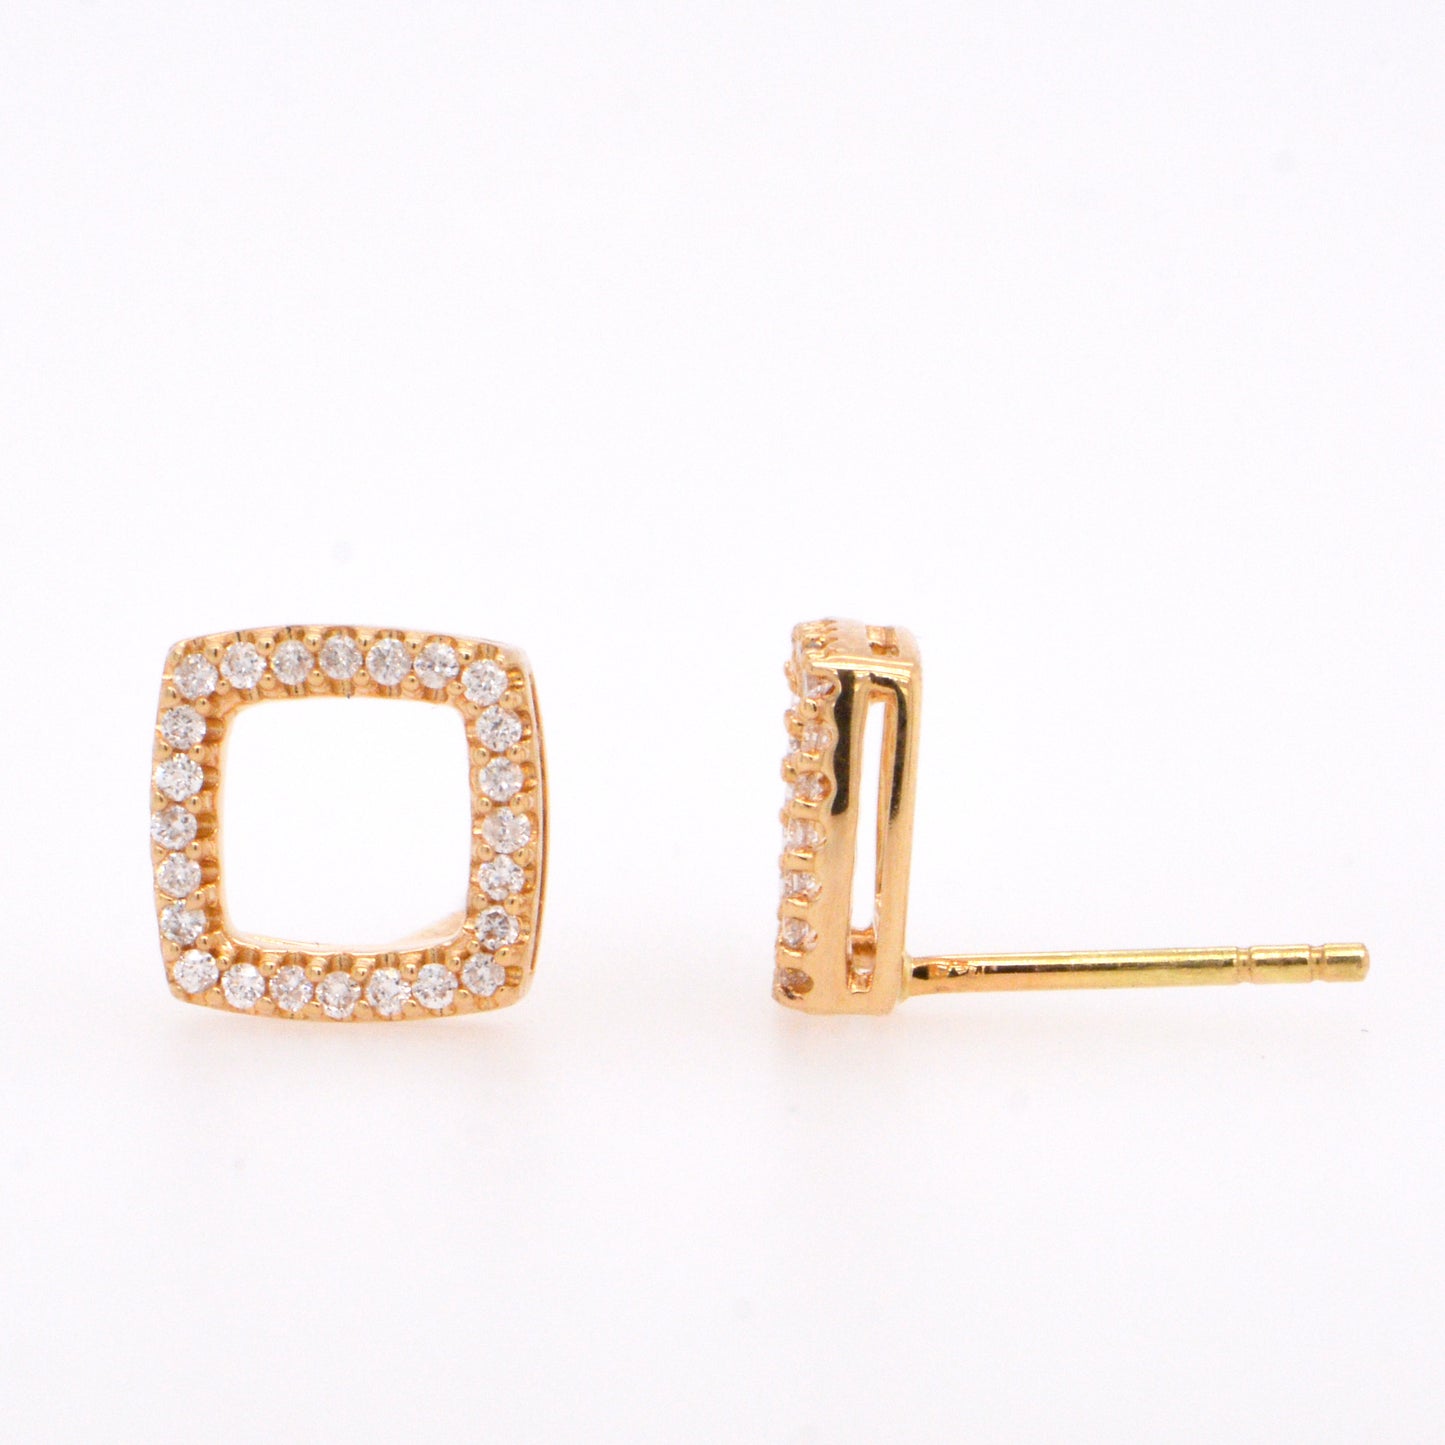 14K Yellow Gold and Diamond Square Earrings